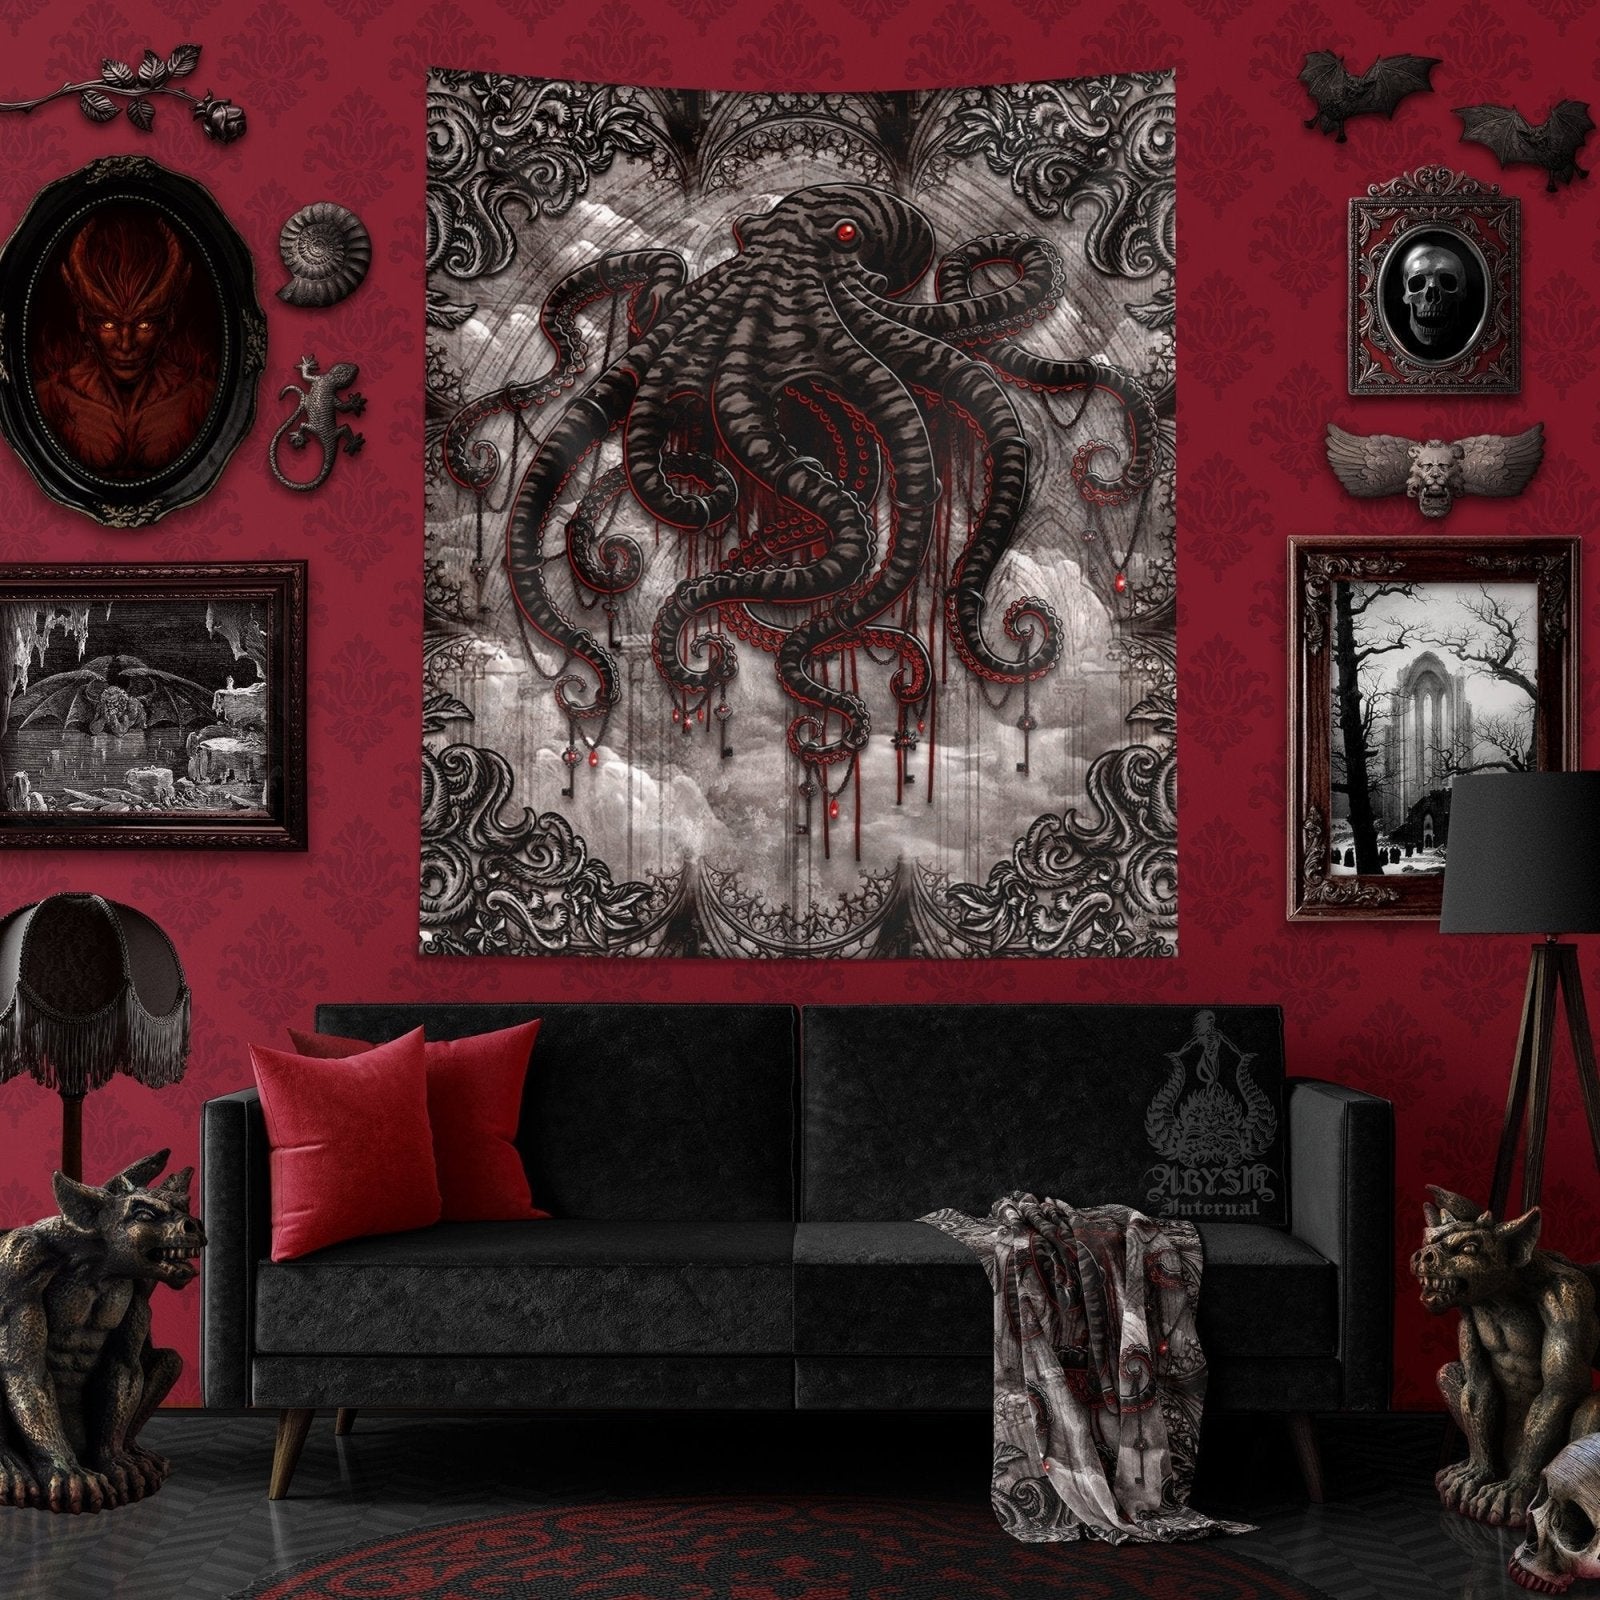 Gothic Tapestry, Octopus Wall Hanging, Goth Home Decor, Art Print - Horror Grunge, Grey - Abysm Internal